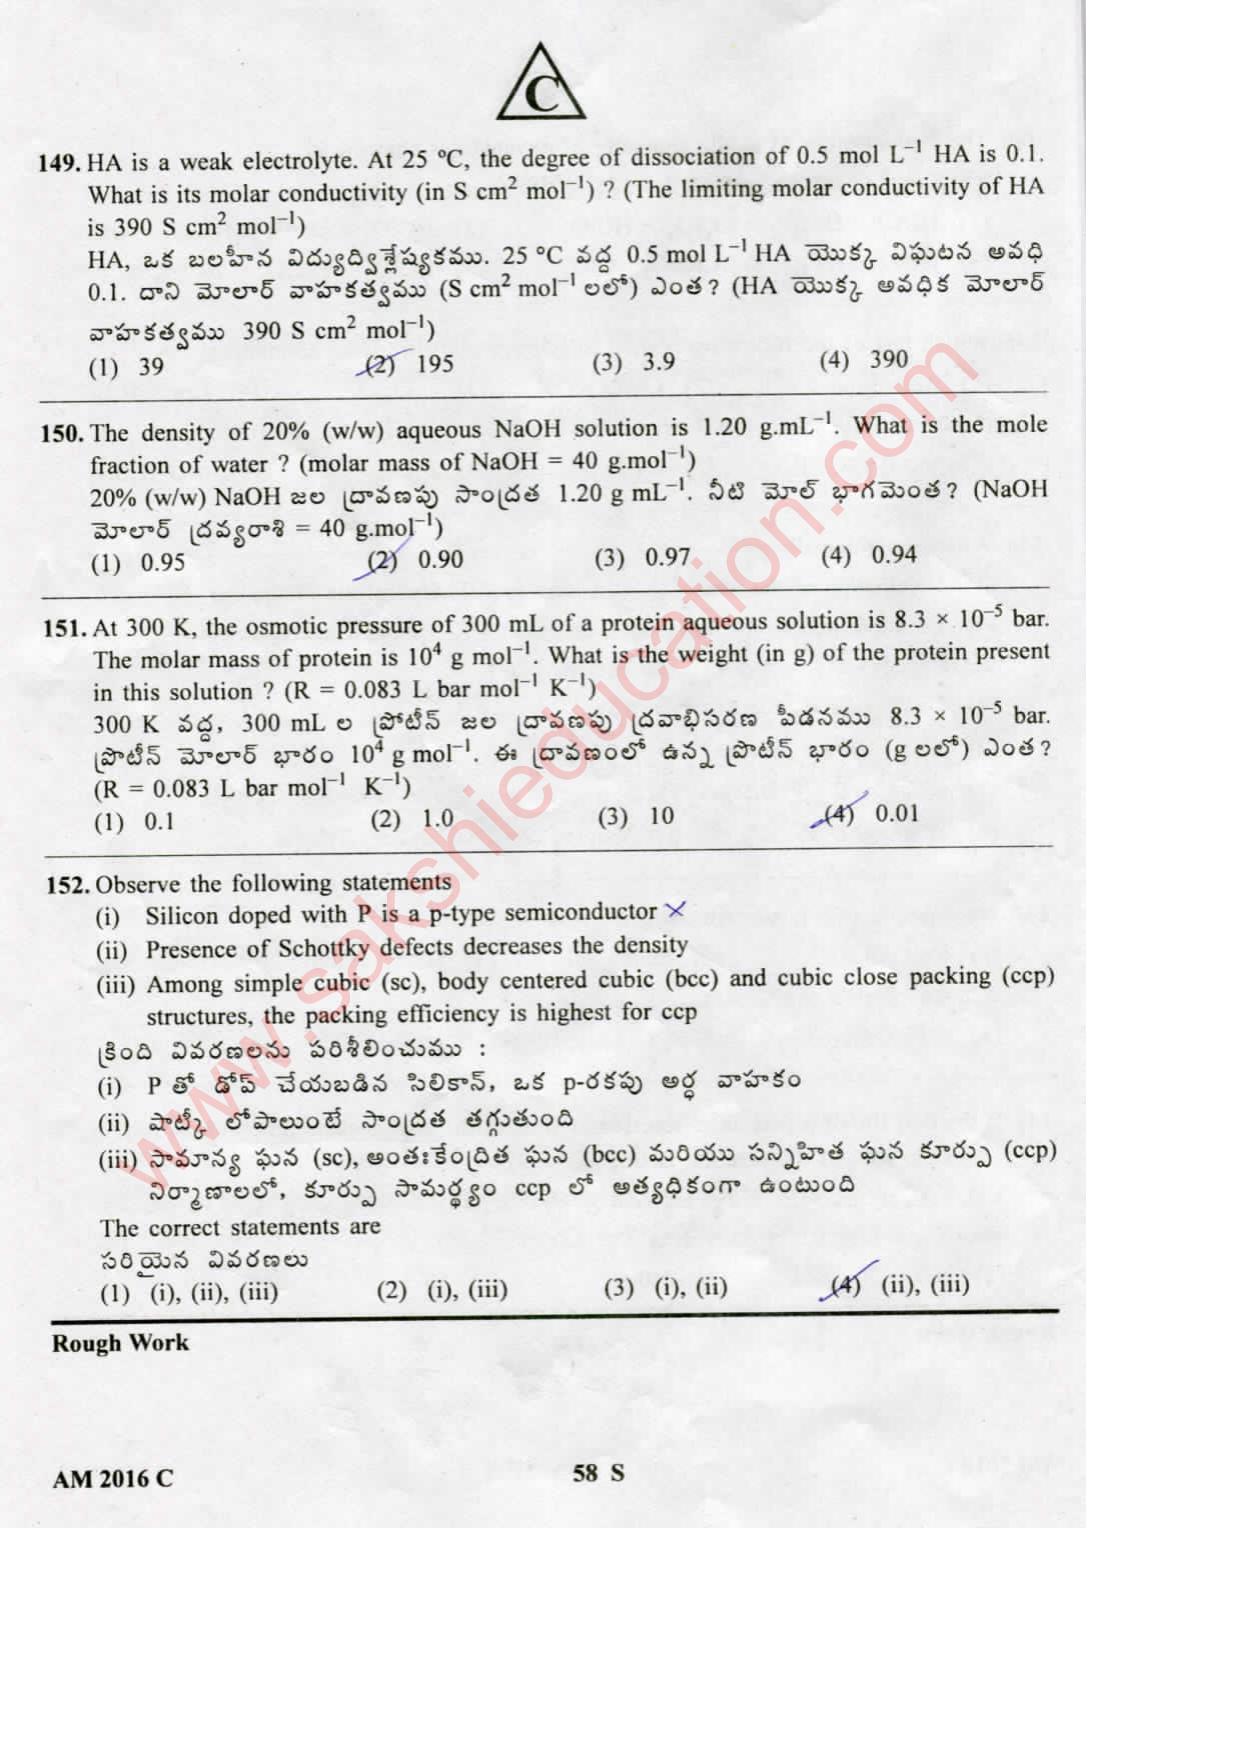 TS EAMCET 2016 Medical Question Paper with Key (Held on 15 May 2016) - Page 58